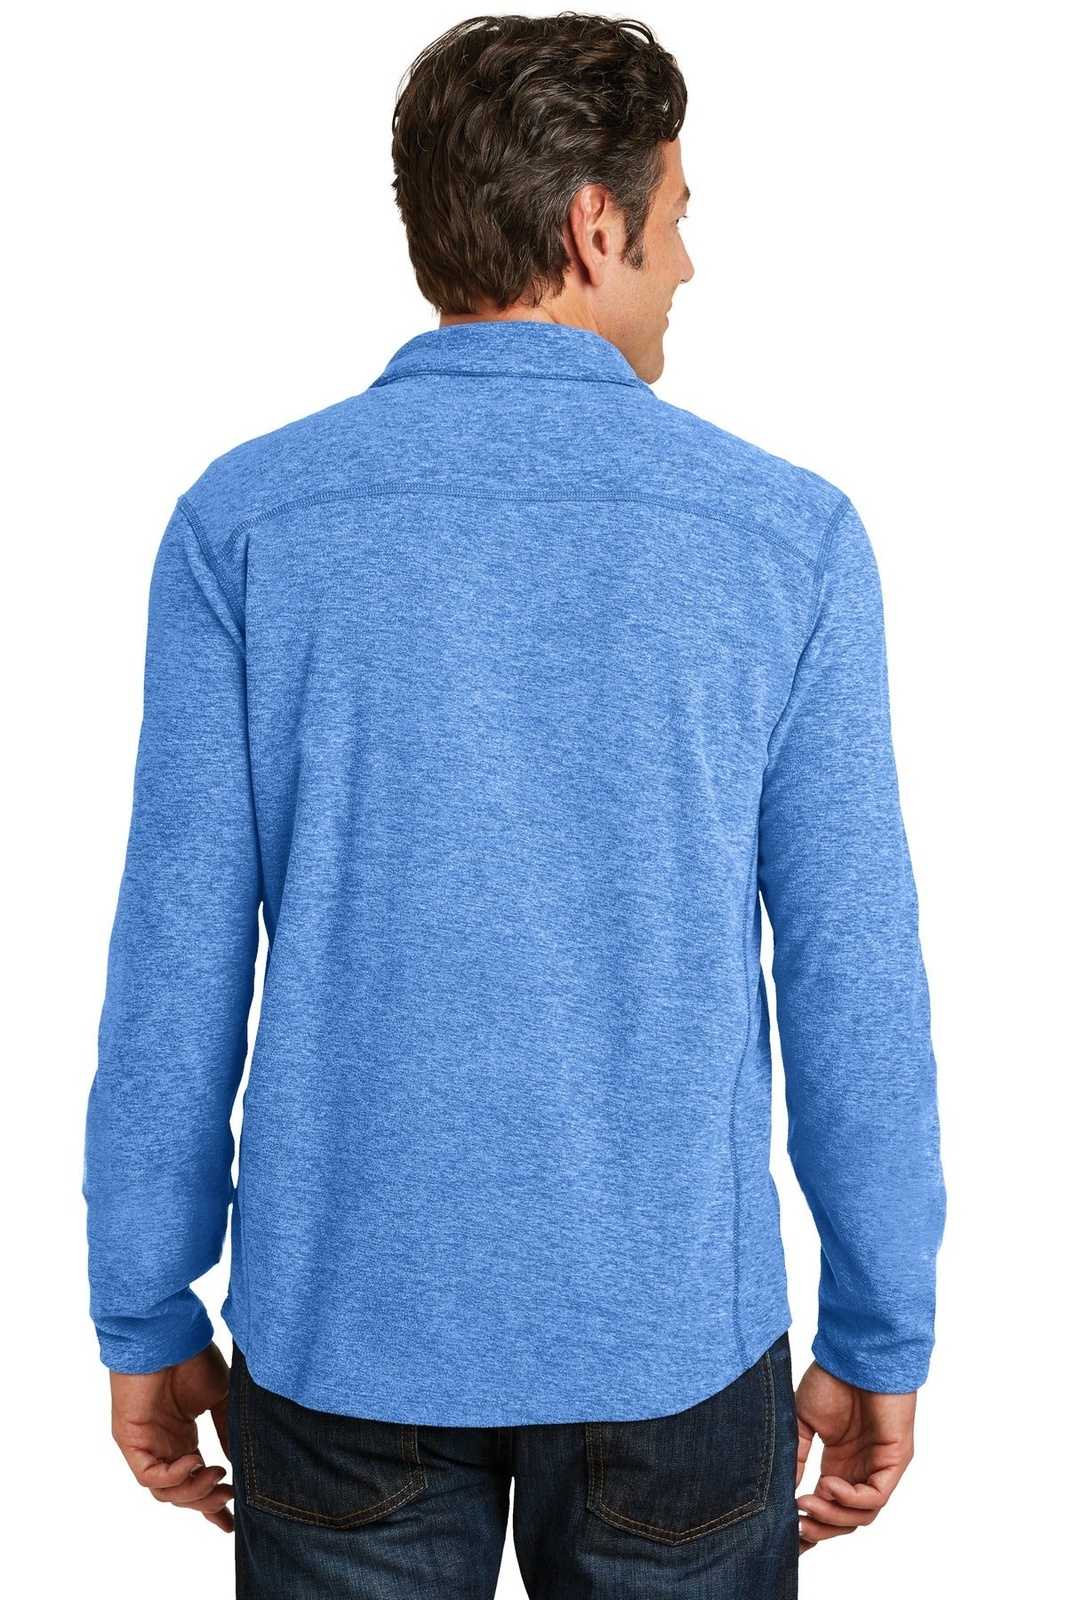 Port Authority F234 Heather Microfleece 1/2-Zip Pullover - Light Royal Heather - HIT a Double - 2